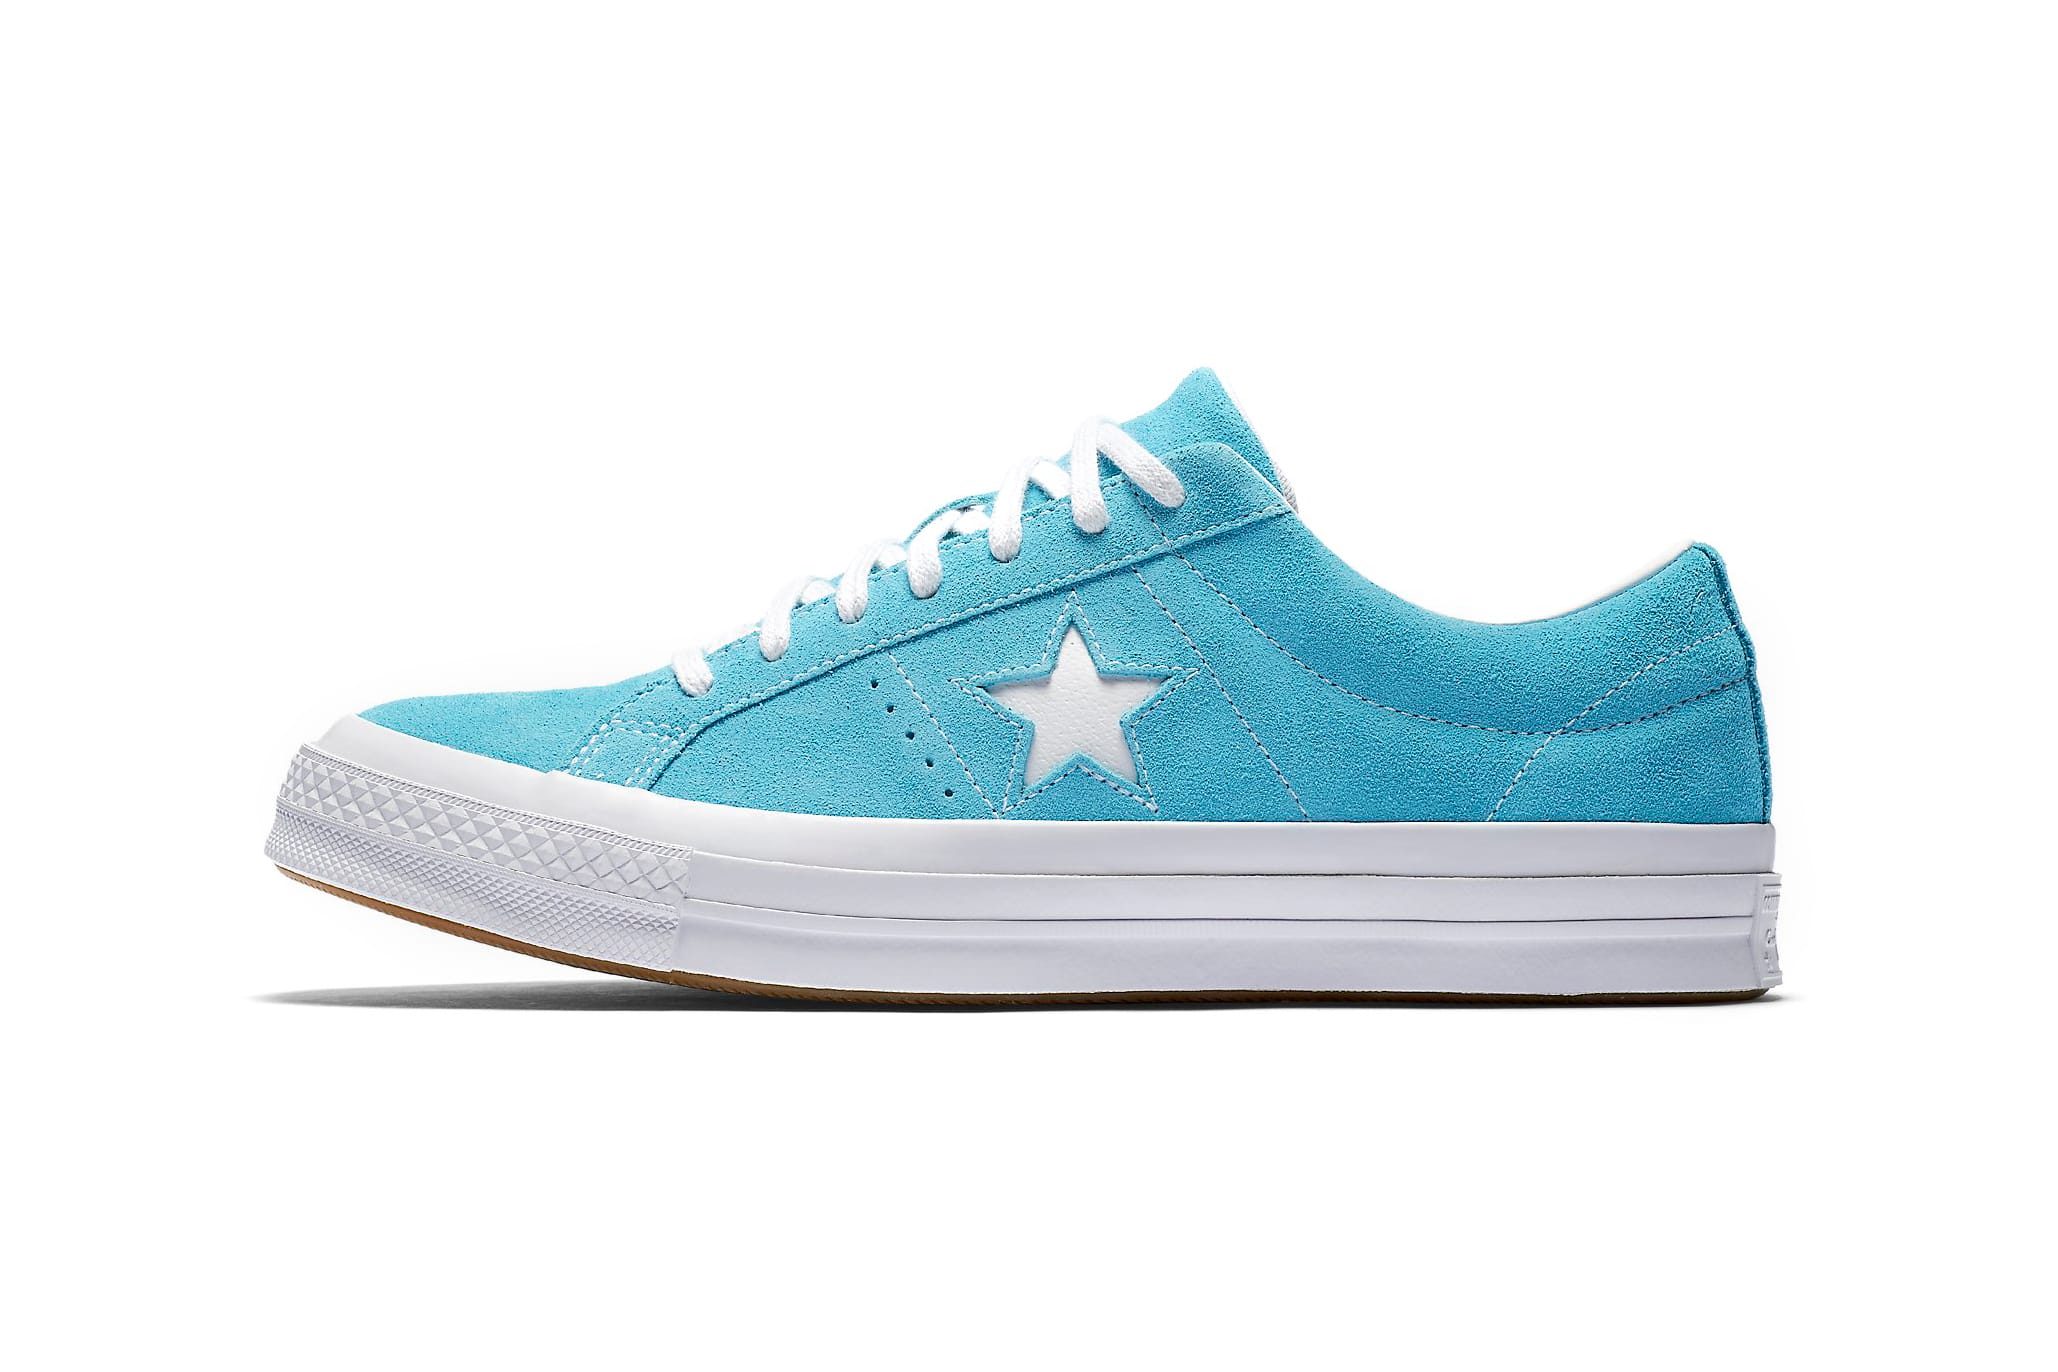 converse one star blue and green